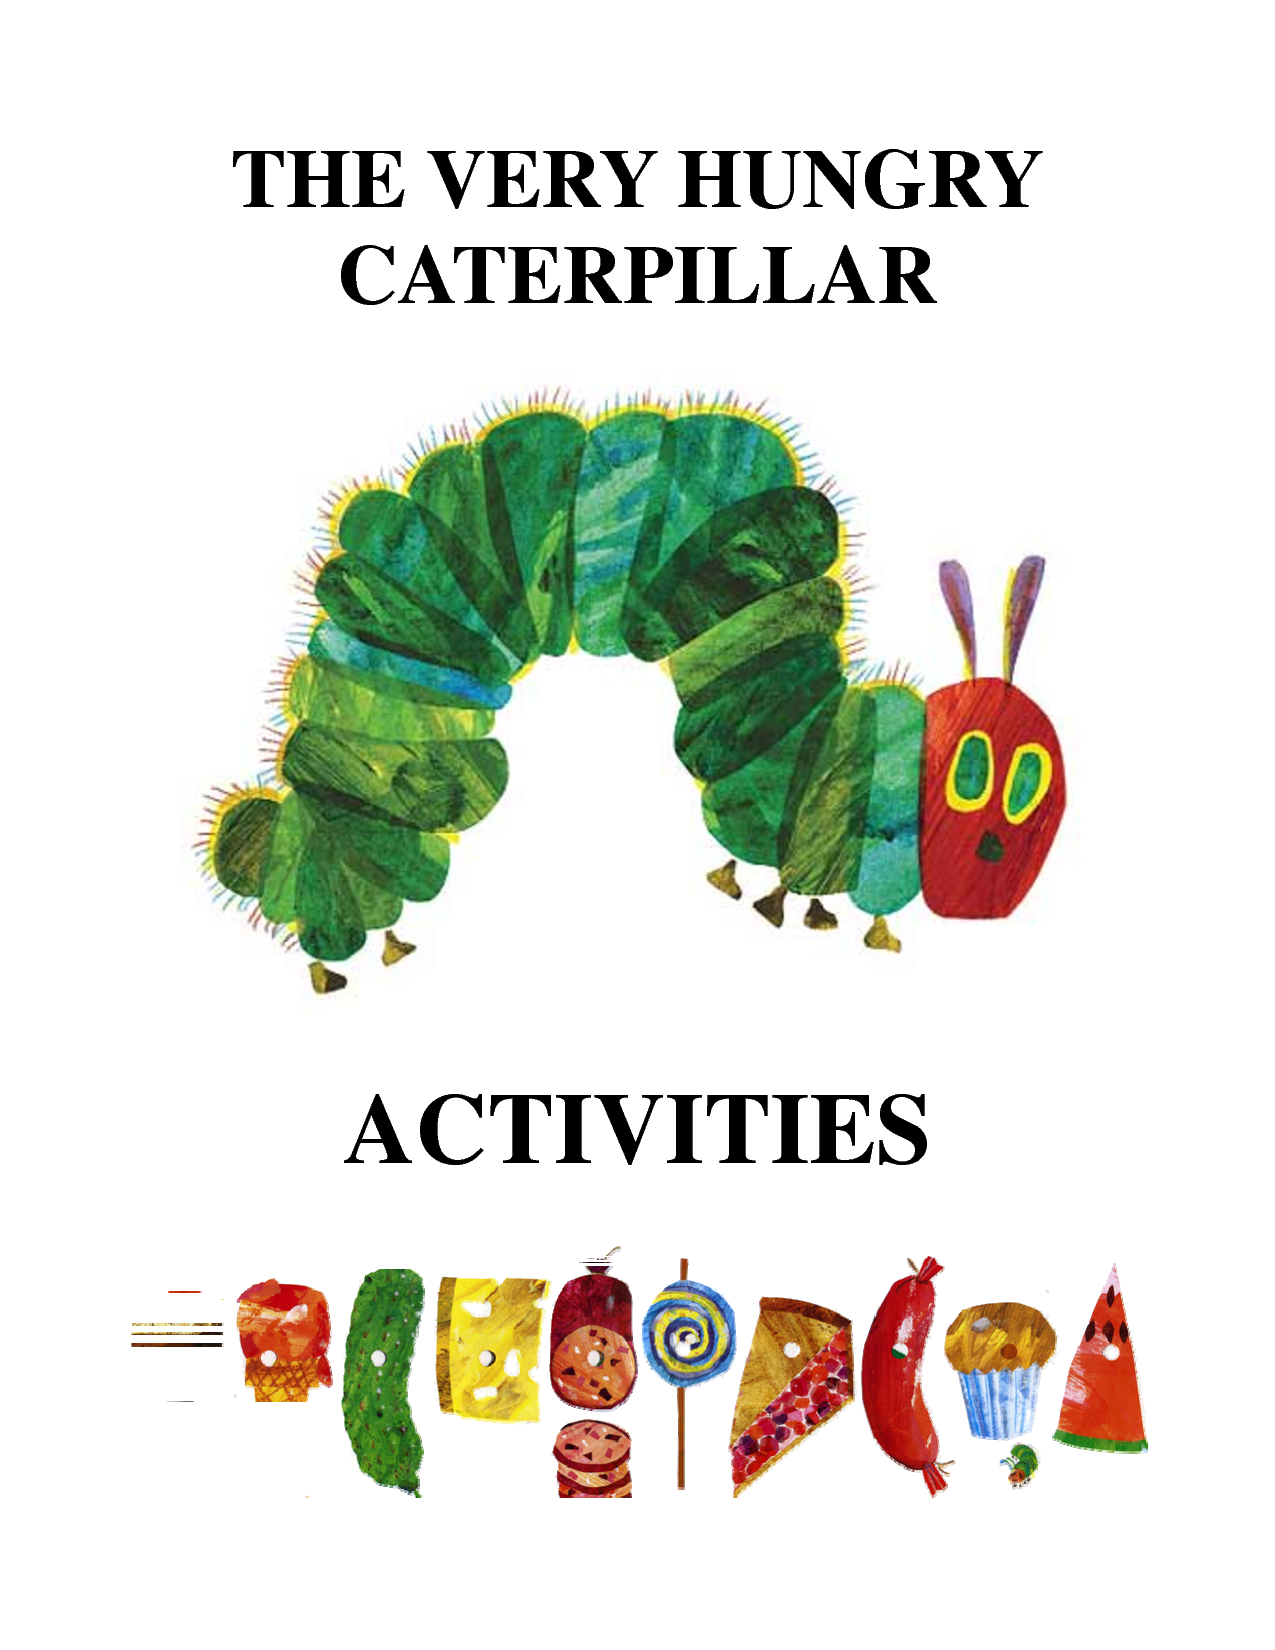 The Very Hungry Caterpillar Clip Art Images   Pictures   Becuo